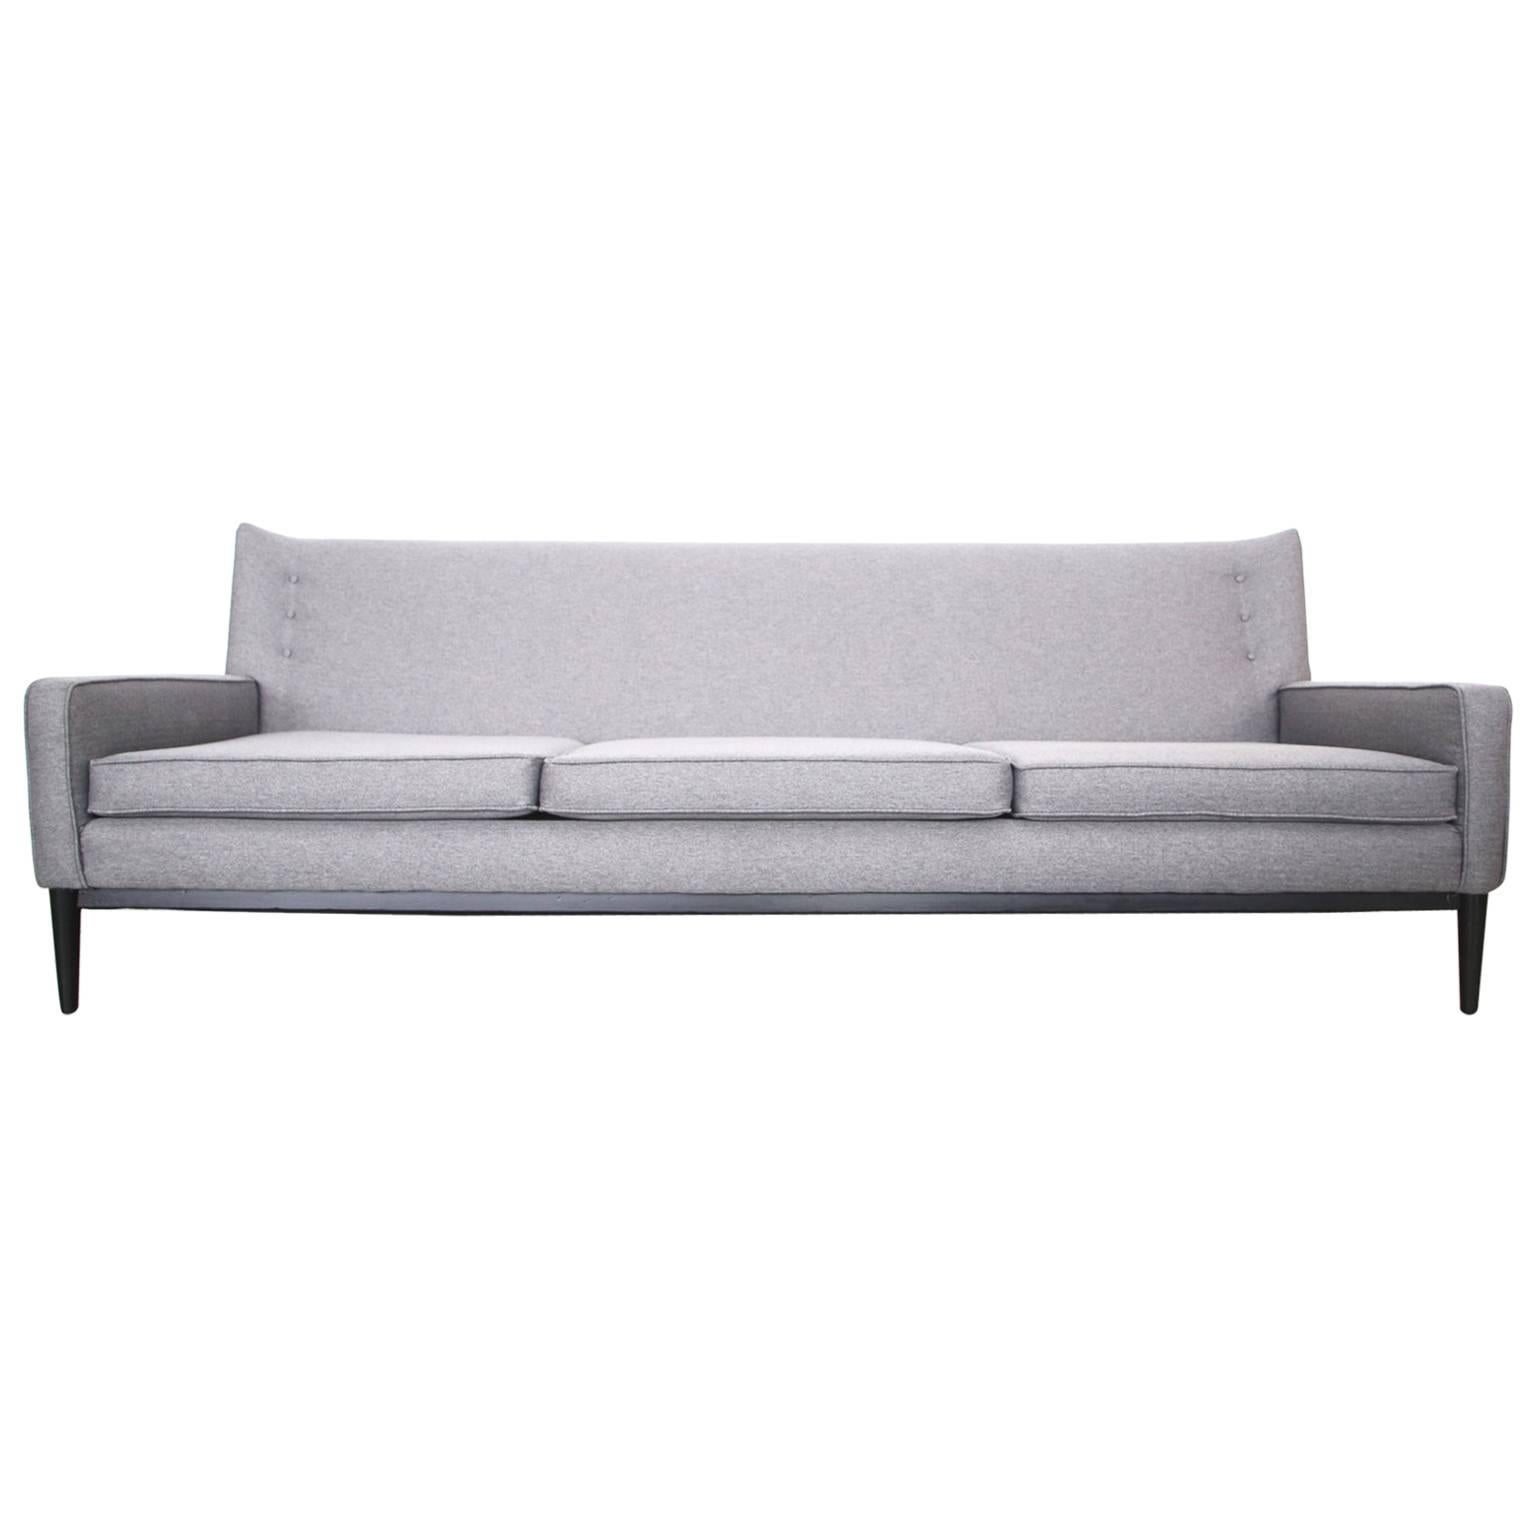 Paul McCobb for Directional Sofa Newly Reupholstered